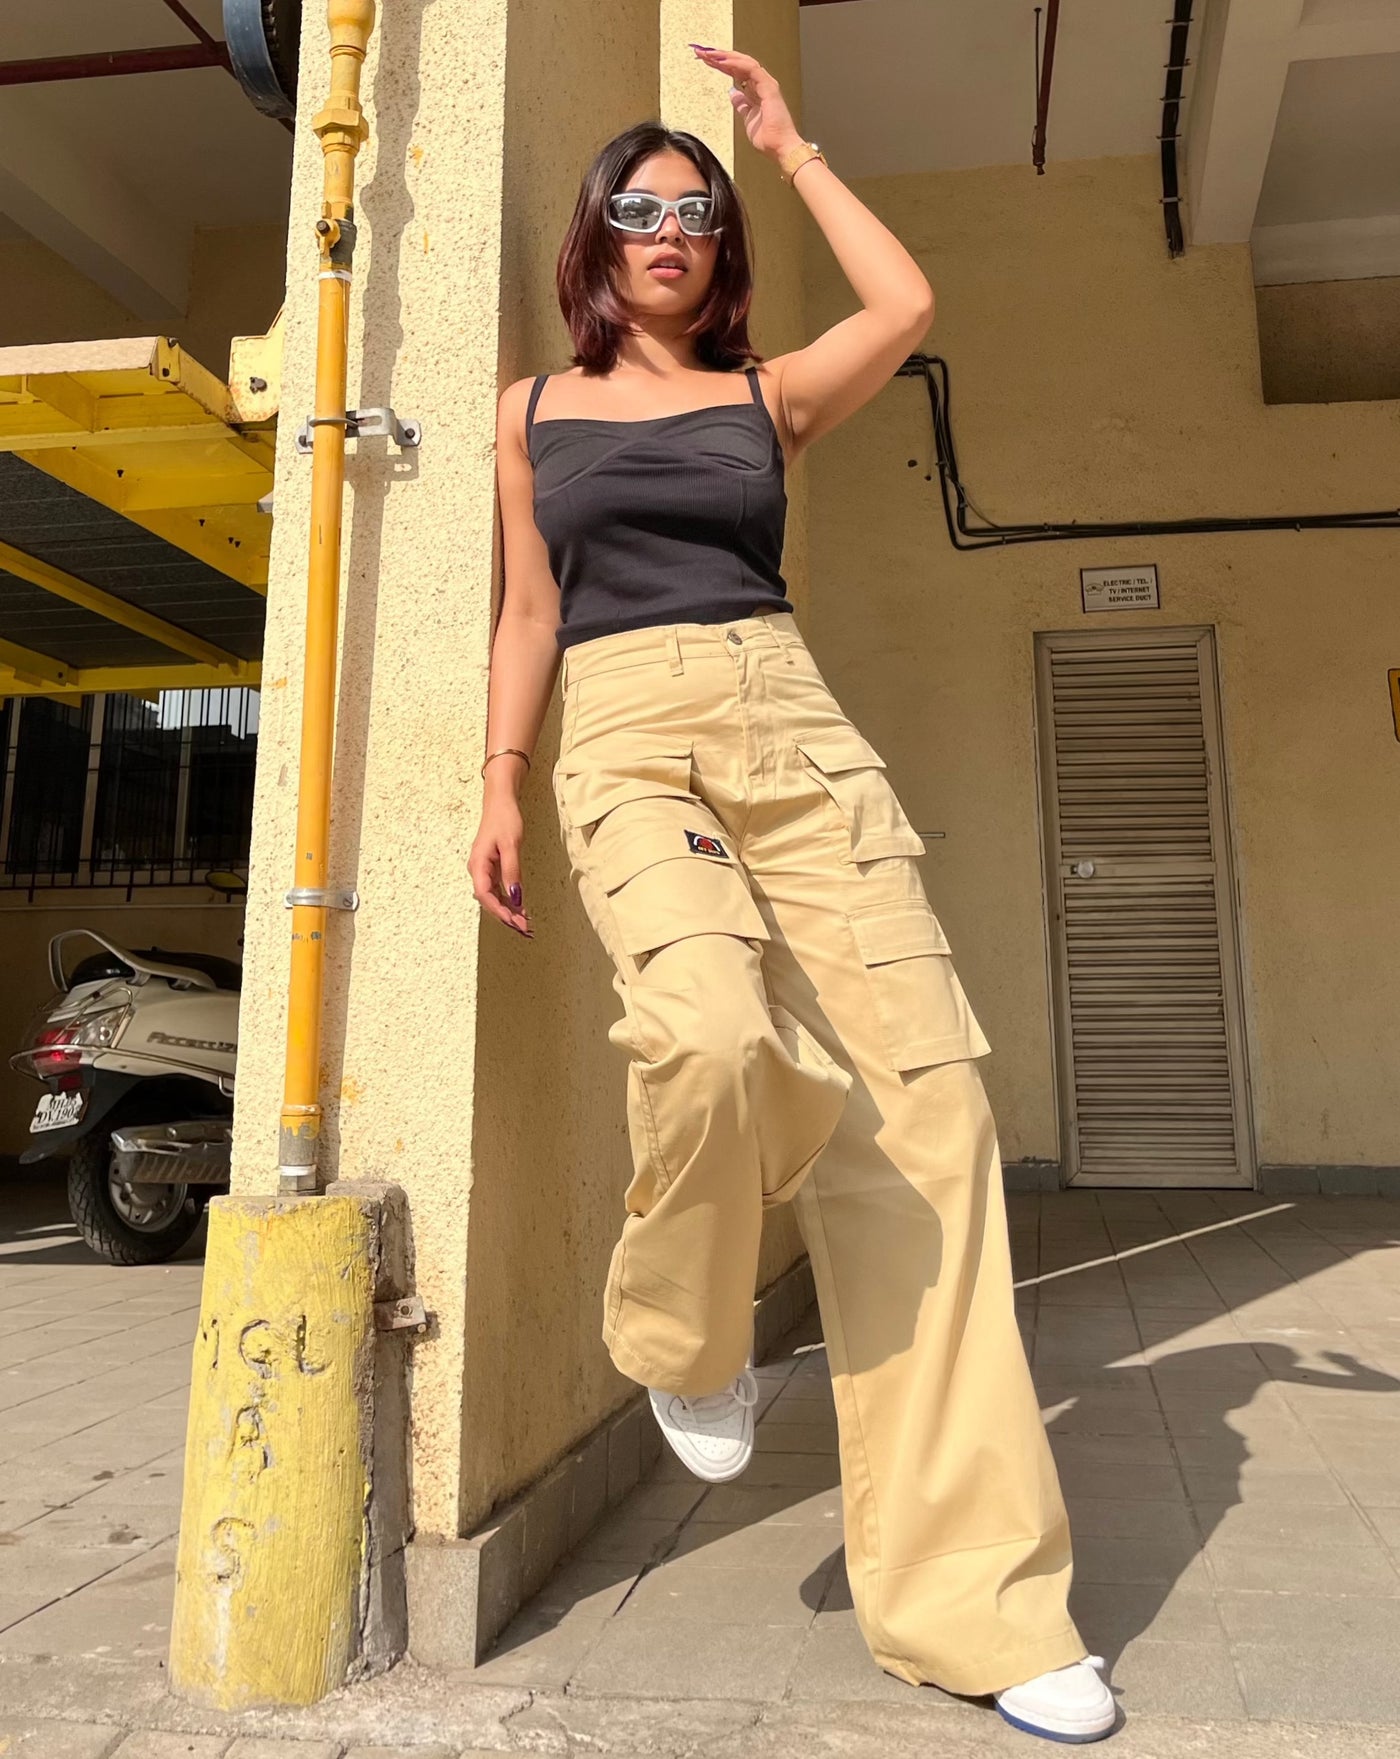 City Chic Multi Pocket Trousers